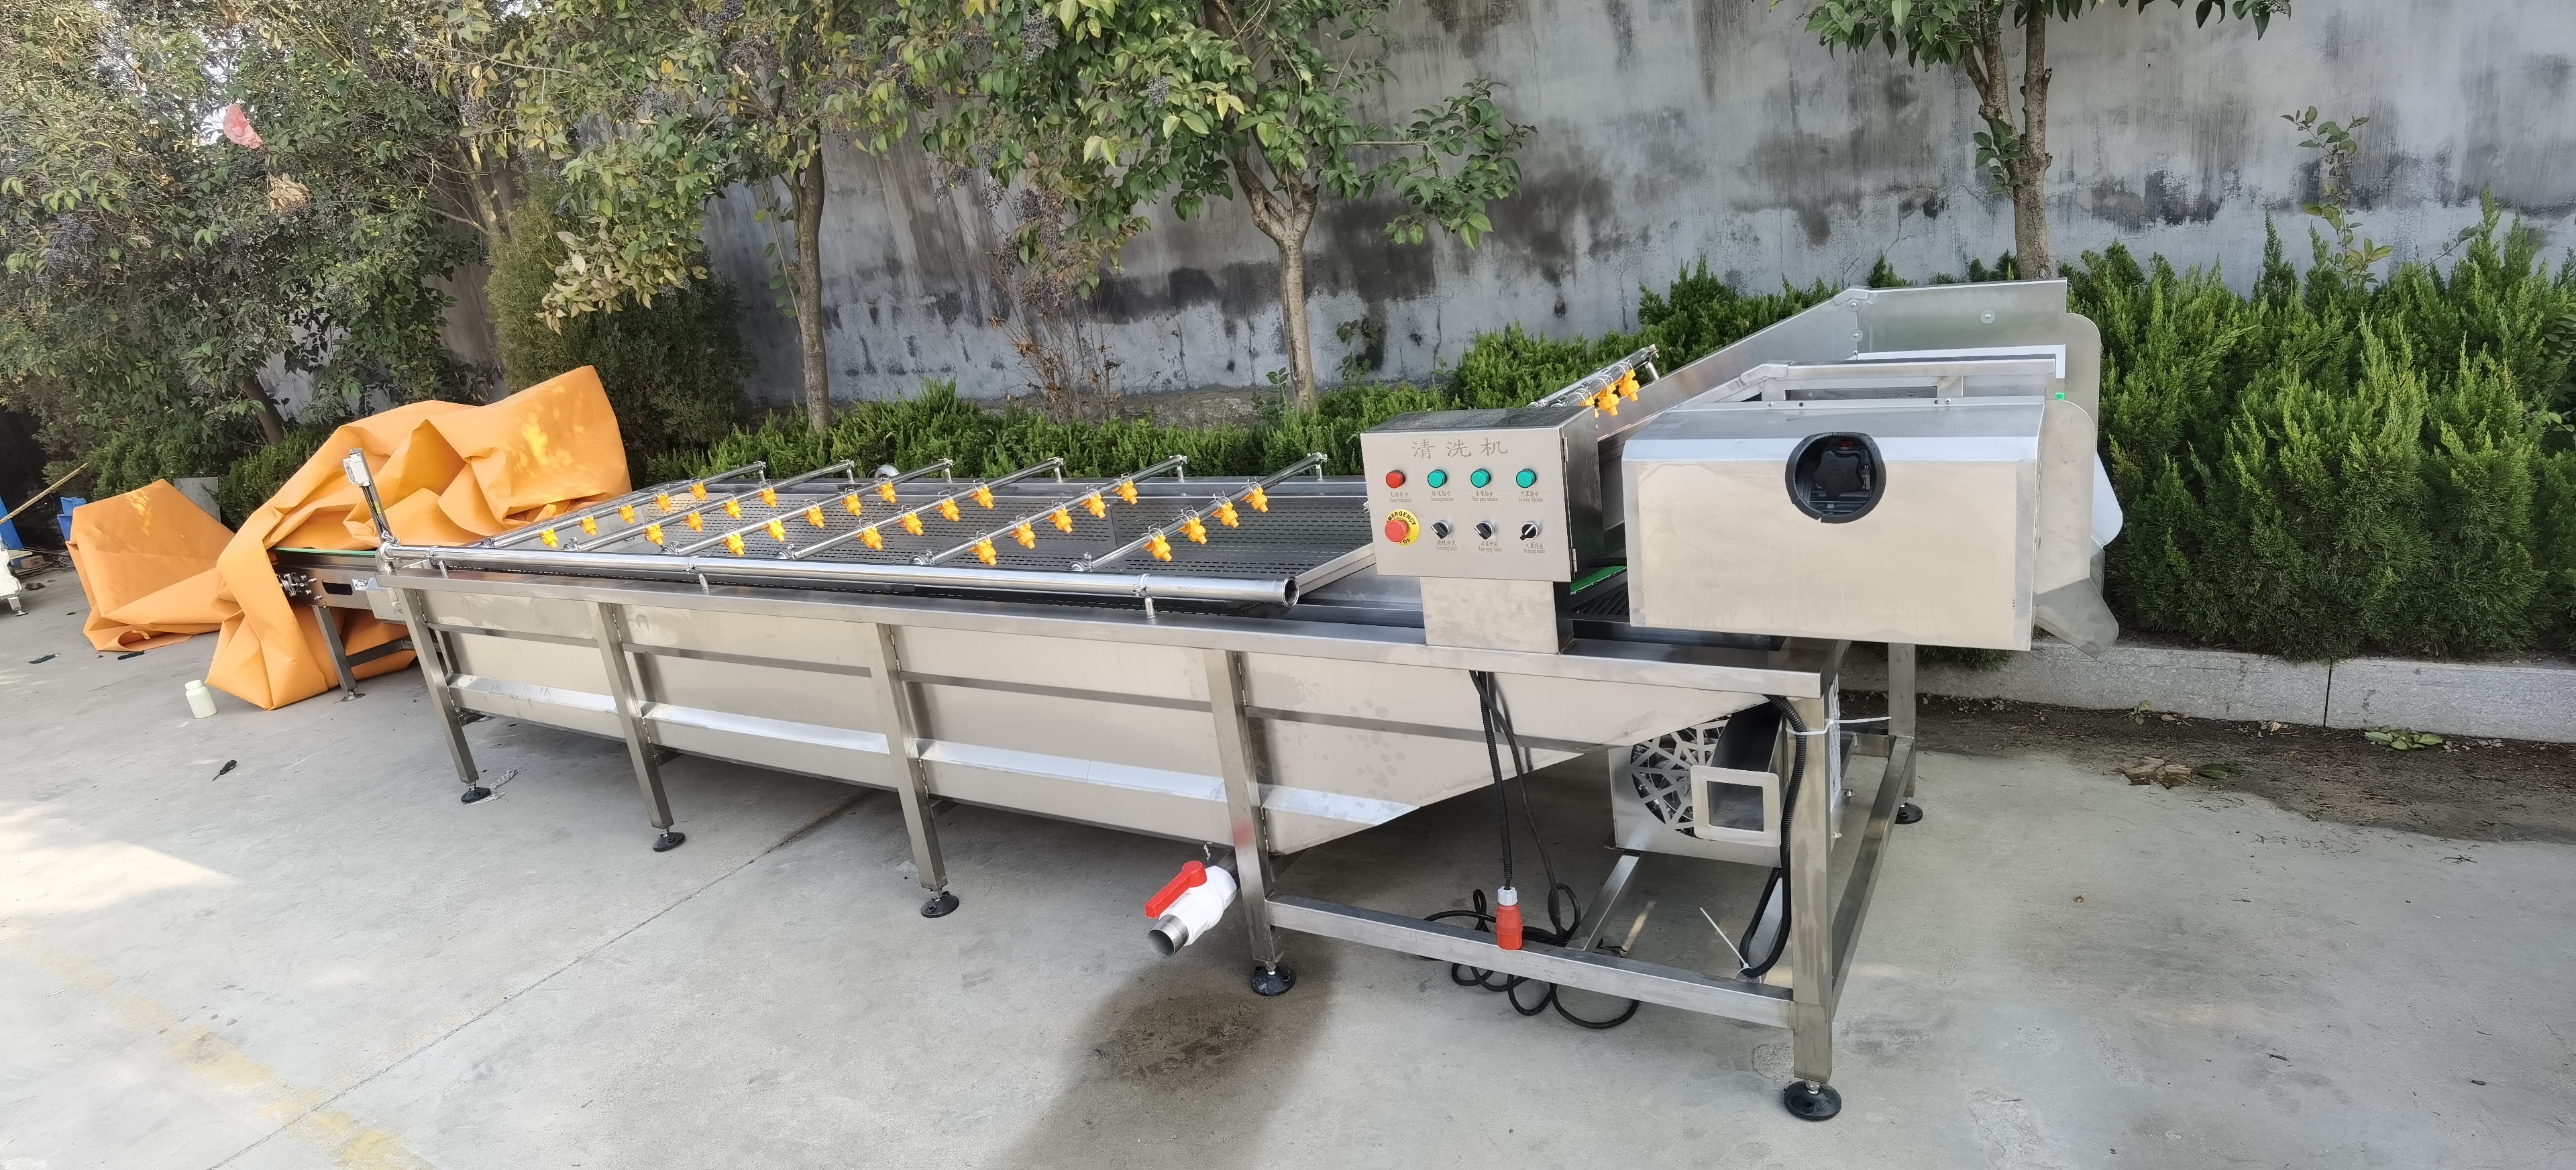 The working principle and characteristics of fruit and vegetable bubble cleaning machine are introdu